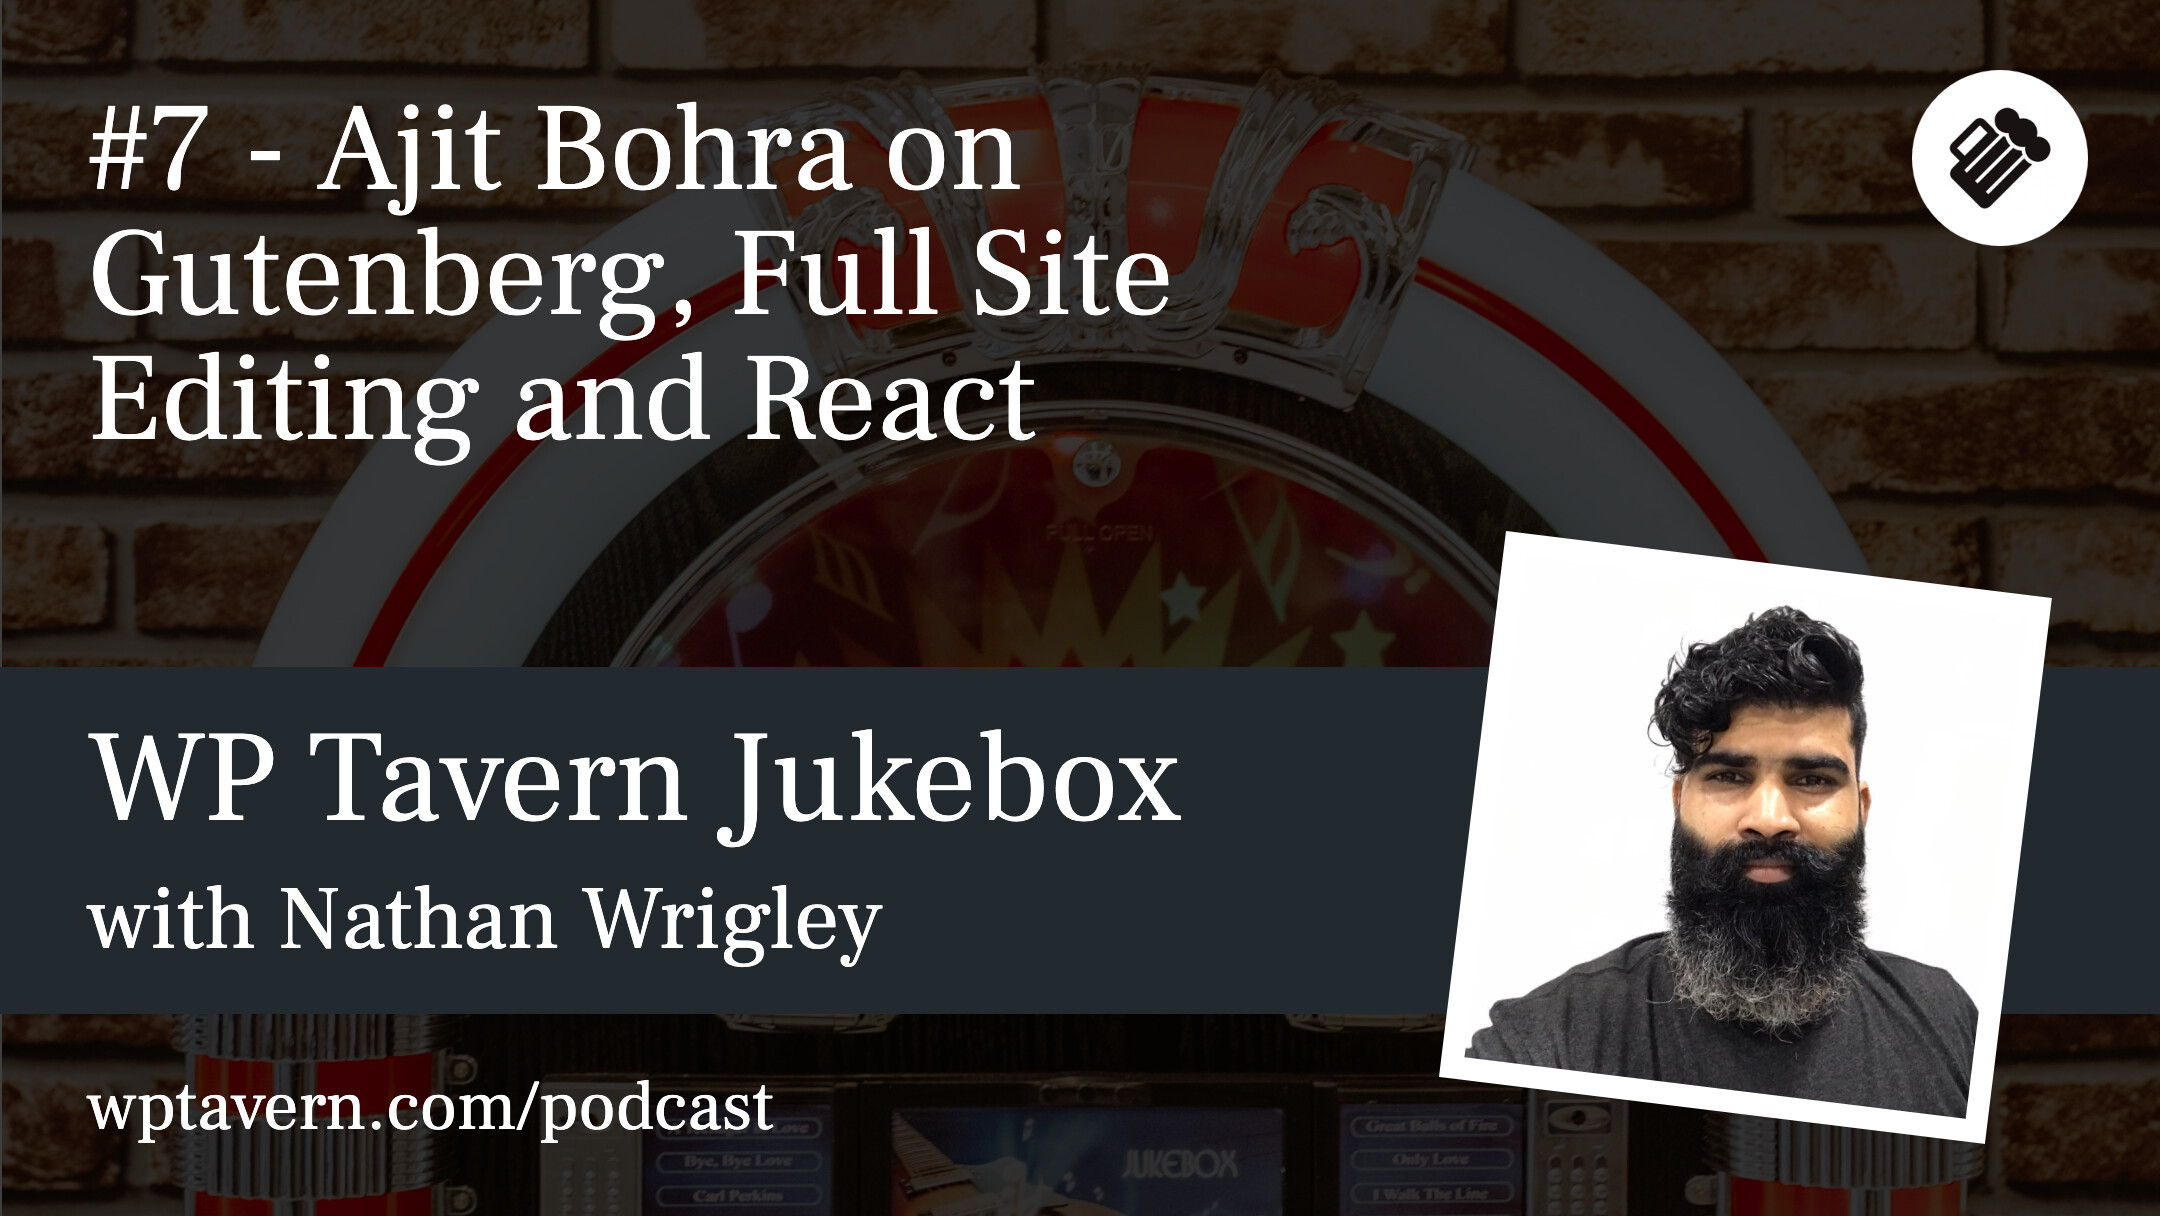 #7 – Ajit Bohra on Gutenberg, Full Site Editing and React